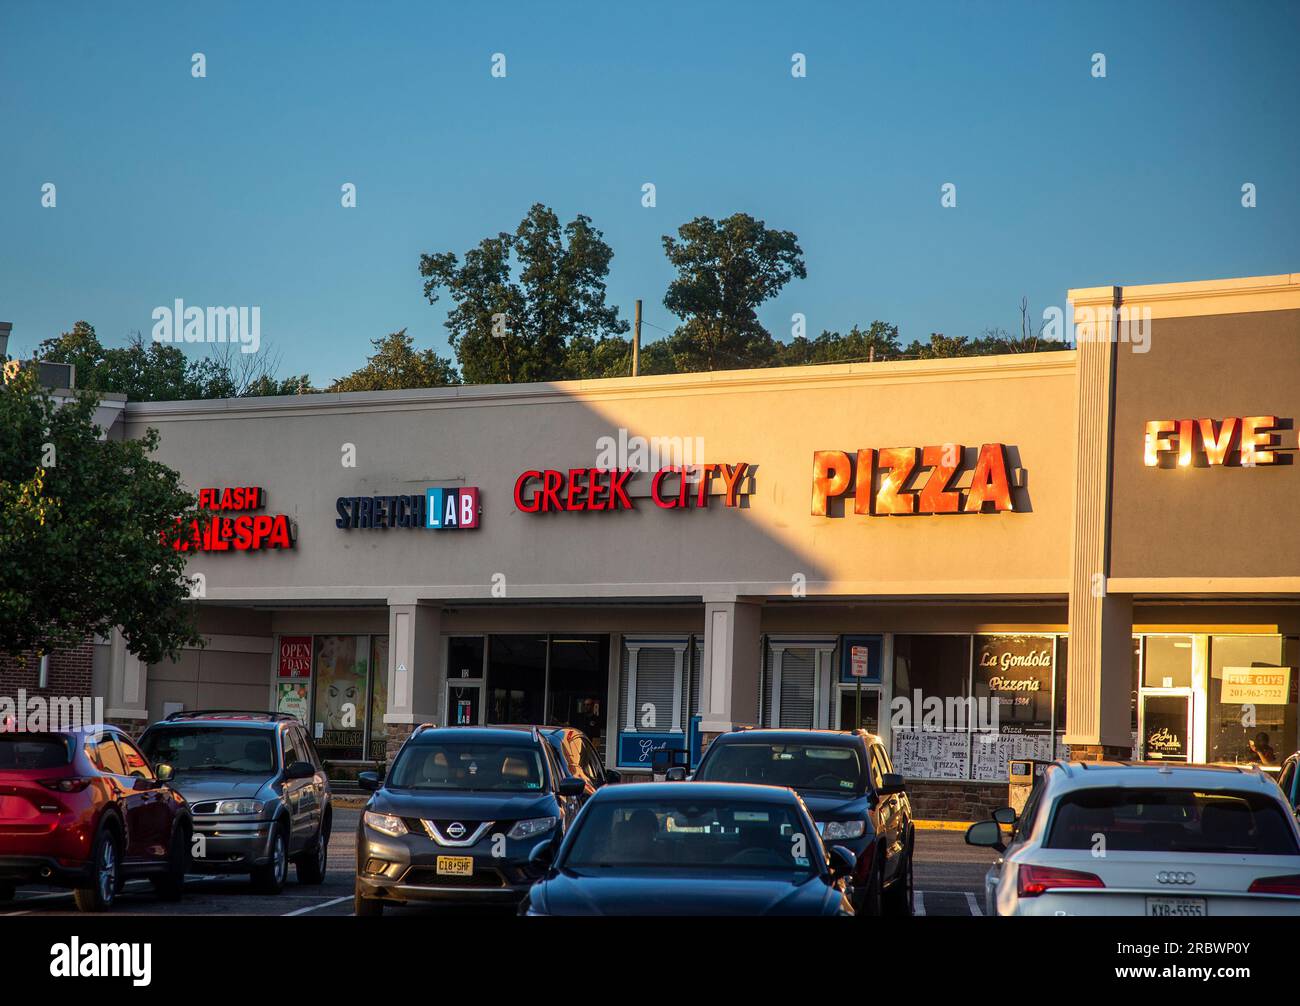 Restaurants in a strip mall Stock Photo